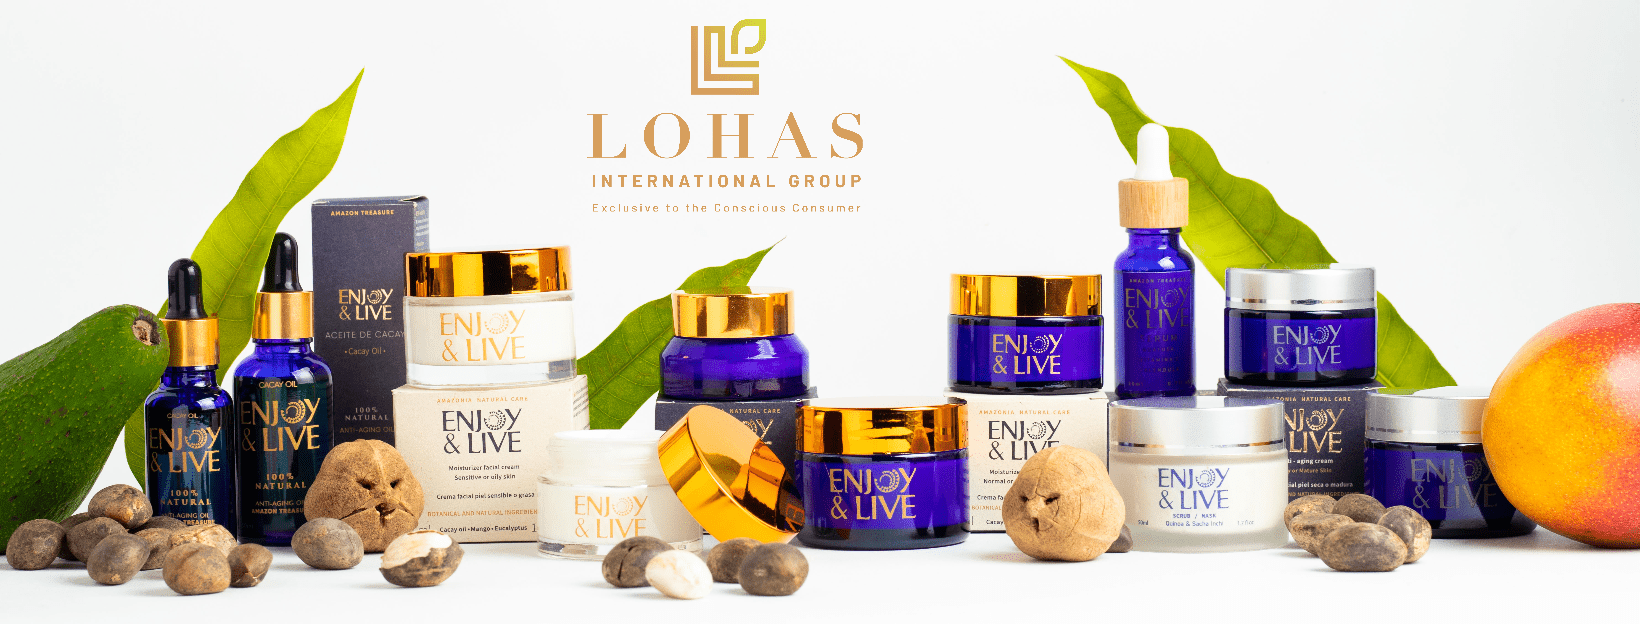 LOHAS_product offering